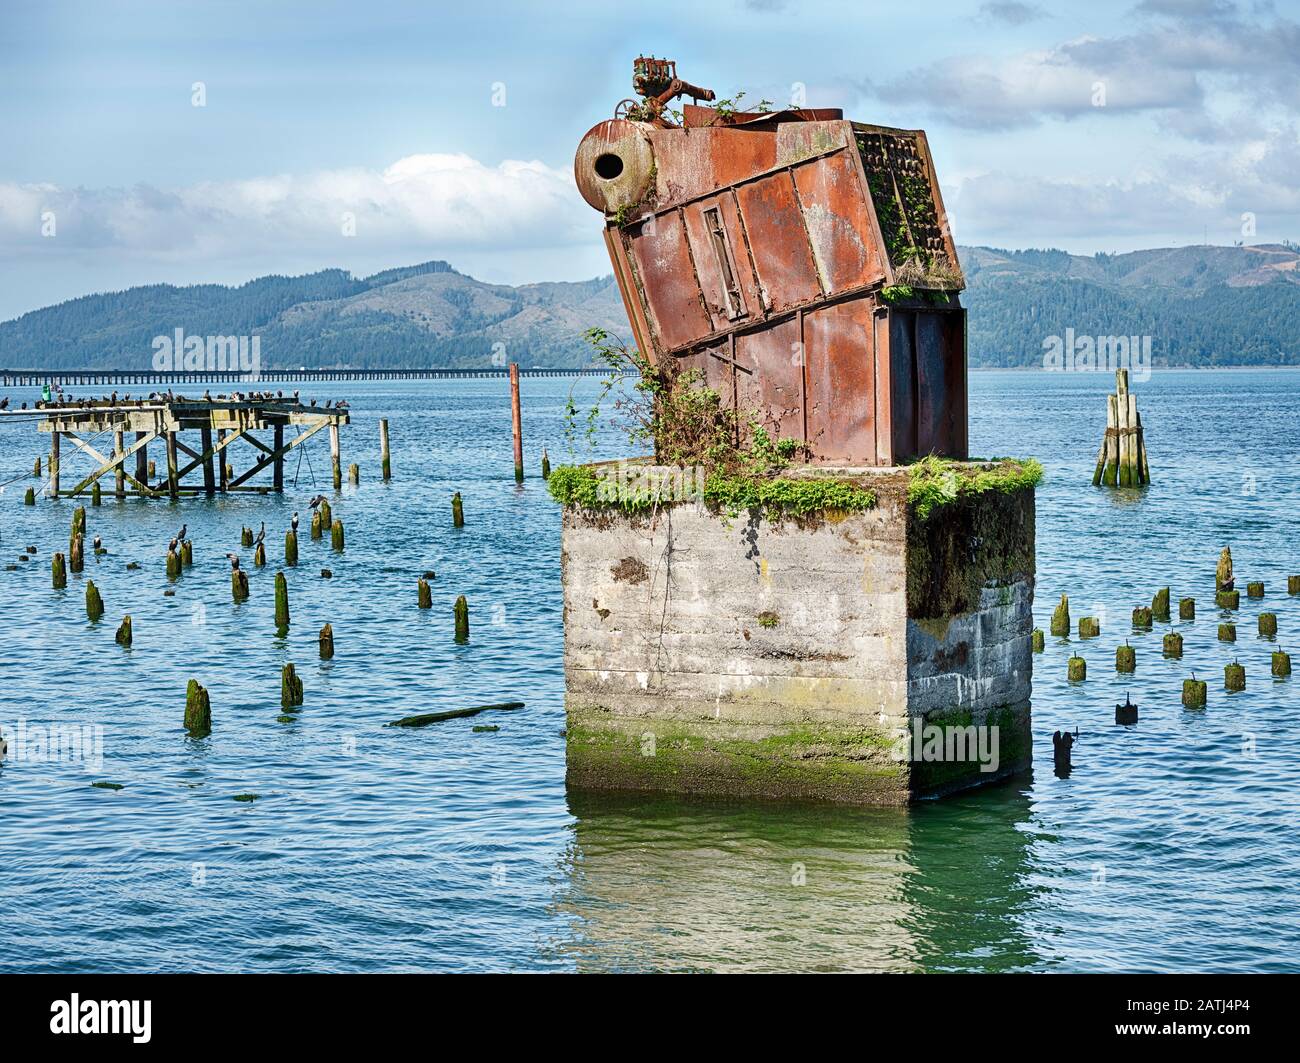 A piece of iron equipment on a huge concrete pillar stands amid the ruins of an old pier on the Columbia River in Astoria. Stock Photo